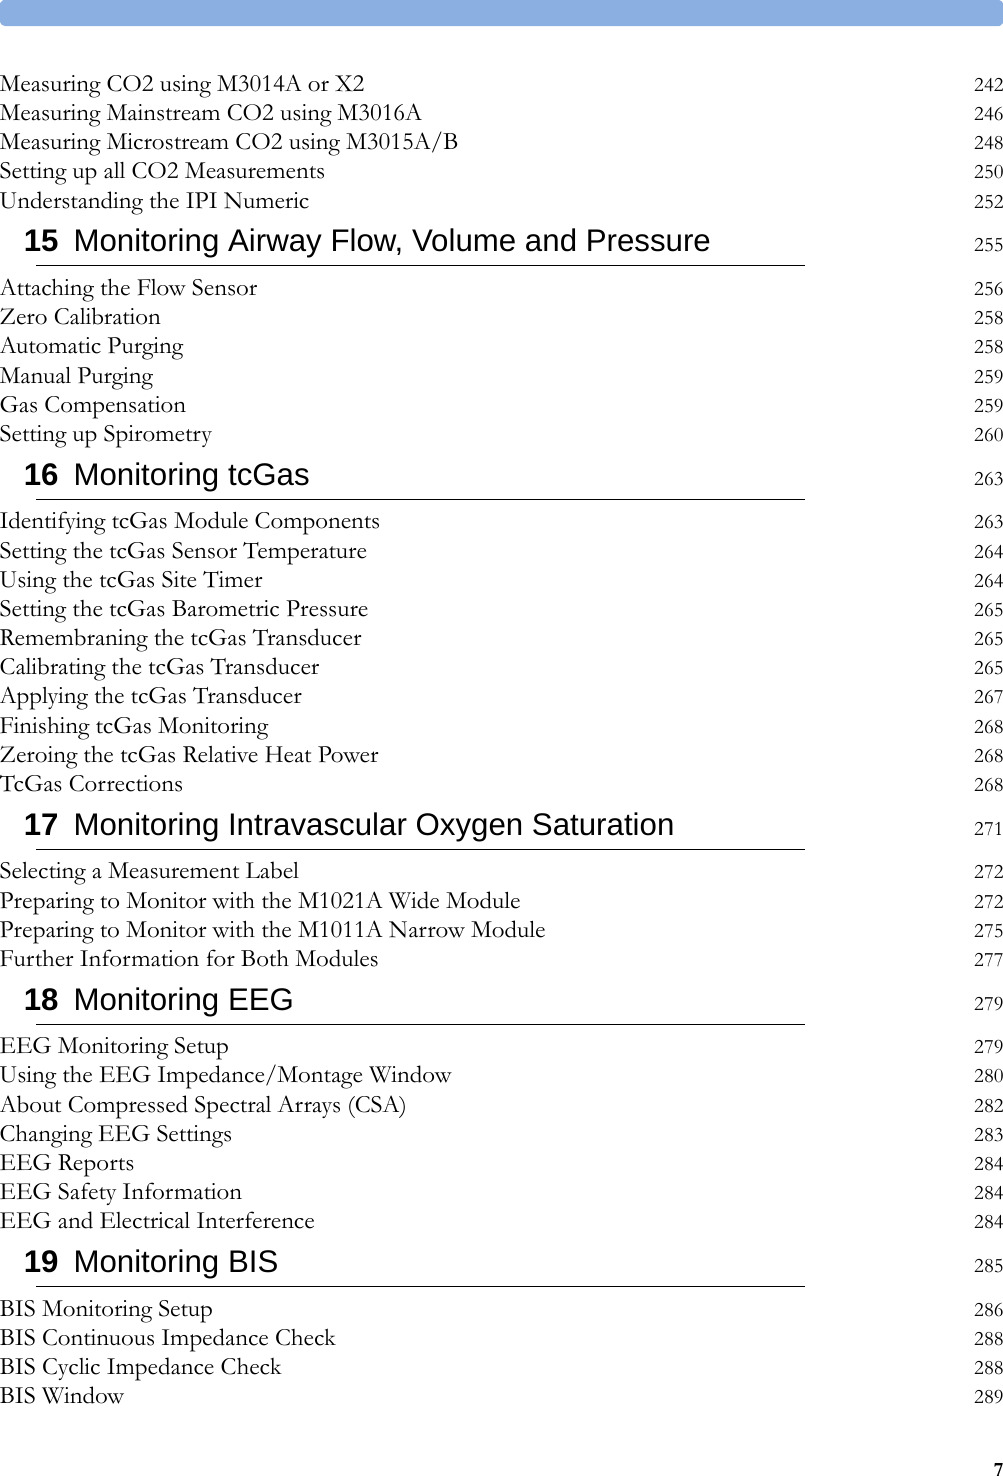 7Measuring CO2 using M3014A or X2 242Measuring Mainstream CO2 using M3016A 246Measuring Microstream CO2 using M3015A/B 248Setting up all CO2 Measurements 250Understanding the IPI Numeric 25215 Monitoring Airway Flow, Volume and Pressure 255Attaching the Flow Sensor 256Zero Calibration 258Automatic Purging 258Manual Purging 259Gas Compensation 259Setting up Spirometry 26016 Monitoring tcGas 263Identifying tcGas Module Components 263Setting the tcGas Sensor Temperature 264Using the tcGas Site Timer 264Setting the tcGas Barometric Pressure 265Remembraning the tcGas Transducer 265Calibrating the tcGas Transducer 265Applying the tcGas Transducer 267Finishing tcGas Monitoring 268Zeroing the tcGas Relative Heat Power 268TcGas Corrections 26817 Monitoring Intravascular Oxygen Saturation 271Selecting a Measurement Label 272Preparing to Monitor with the M1021A Wide Module 272Preparing to Monitor with the M1011A Narrow Module 275Further Information for Both Modules 27718 Monitoring EEG 279EEG Monitoring Setup 279Using the EEG Impedance/Montage Window 280About Compressed Spectral Arrays (CSA) 282Changing EEG Settings 283EEG Reports 284EEG Safety Information 284EEG and Electrical Interference 28419 Monitoring BIS 285BIS Monitoring Setup 286BIS Continuous Impedance Check 288BIS Cyclic Impedance Check 288BIS Window 289